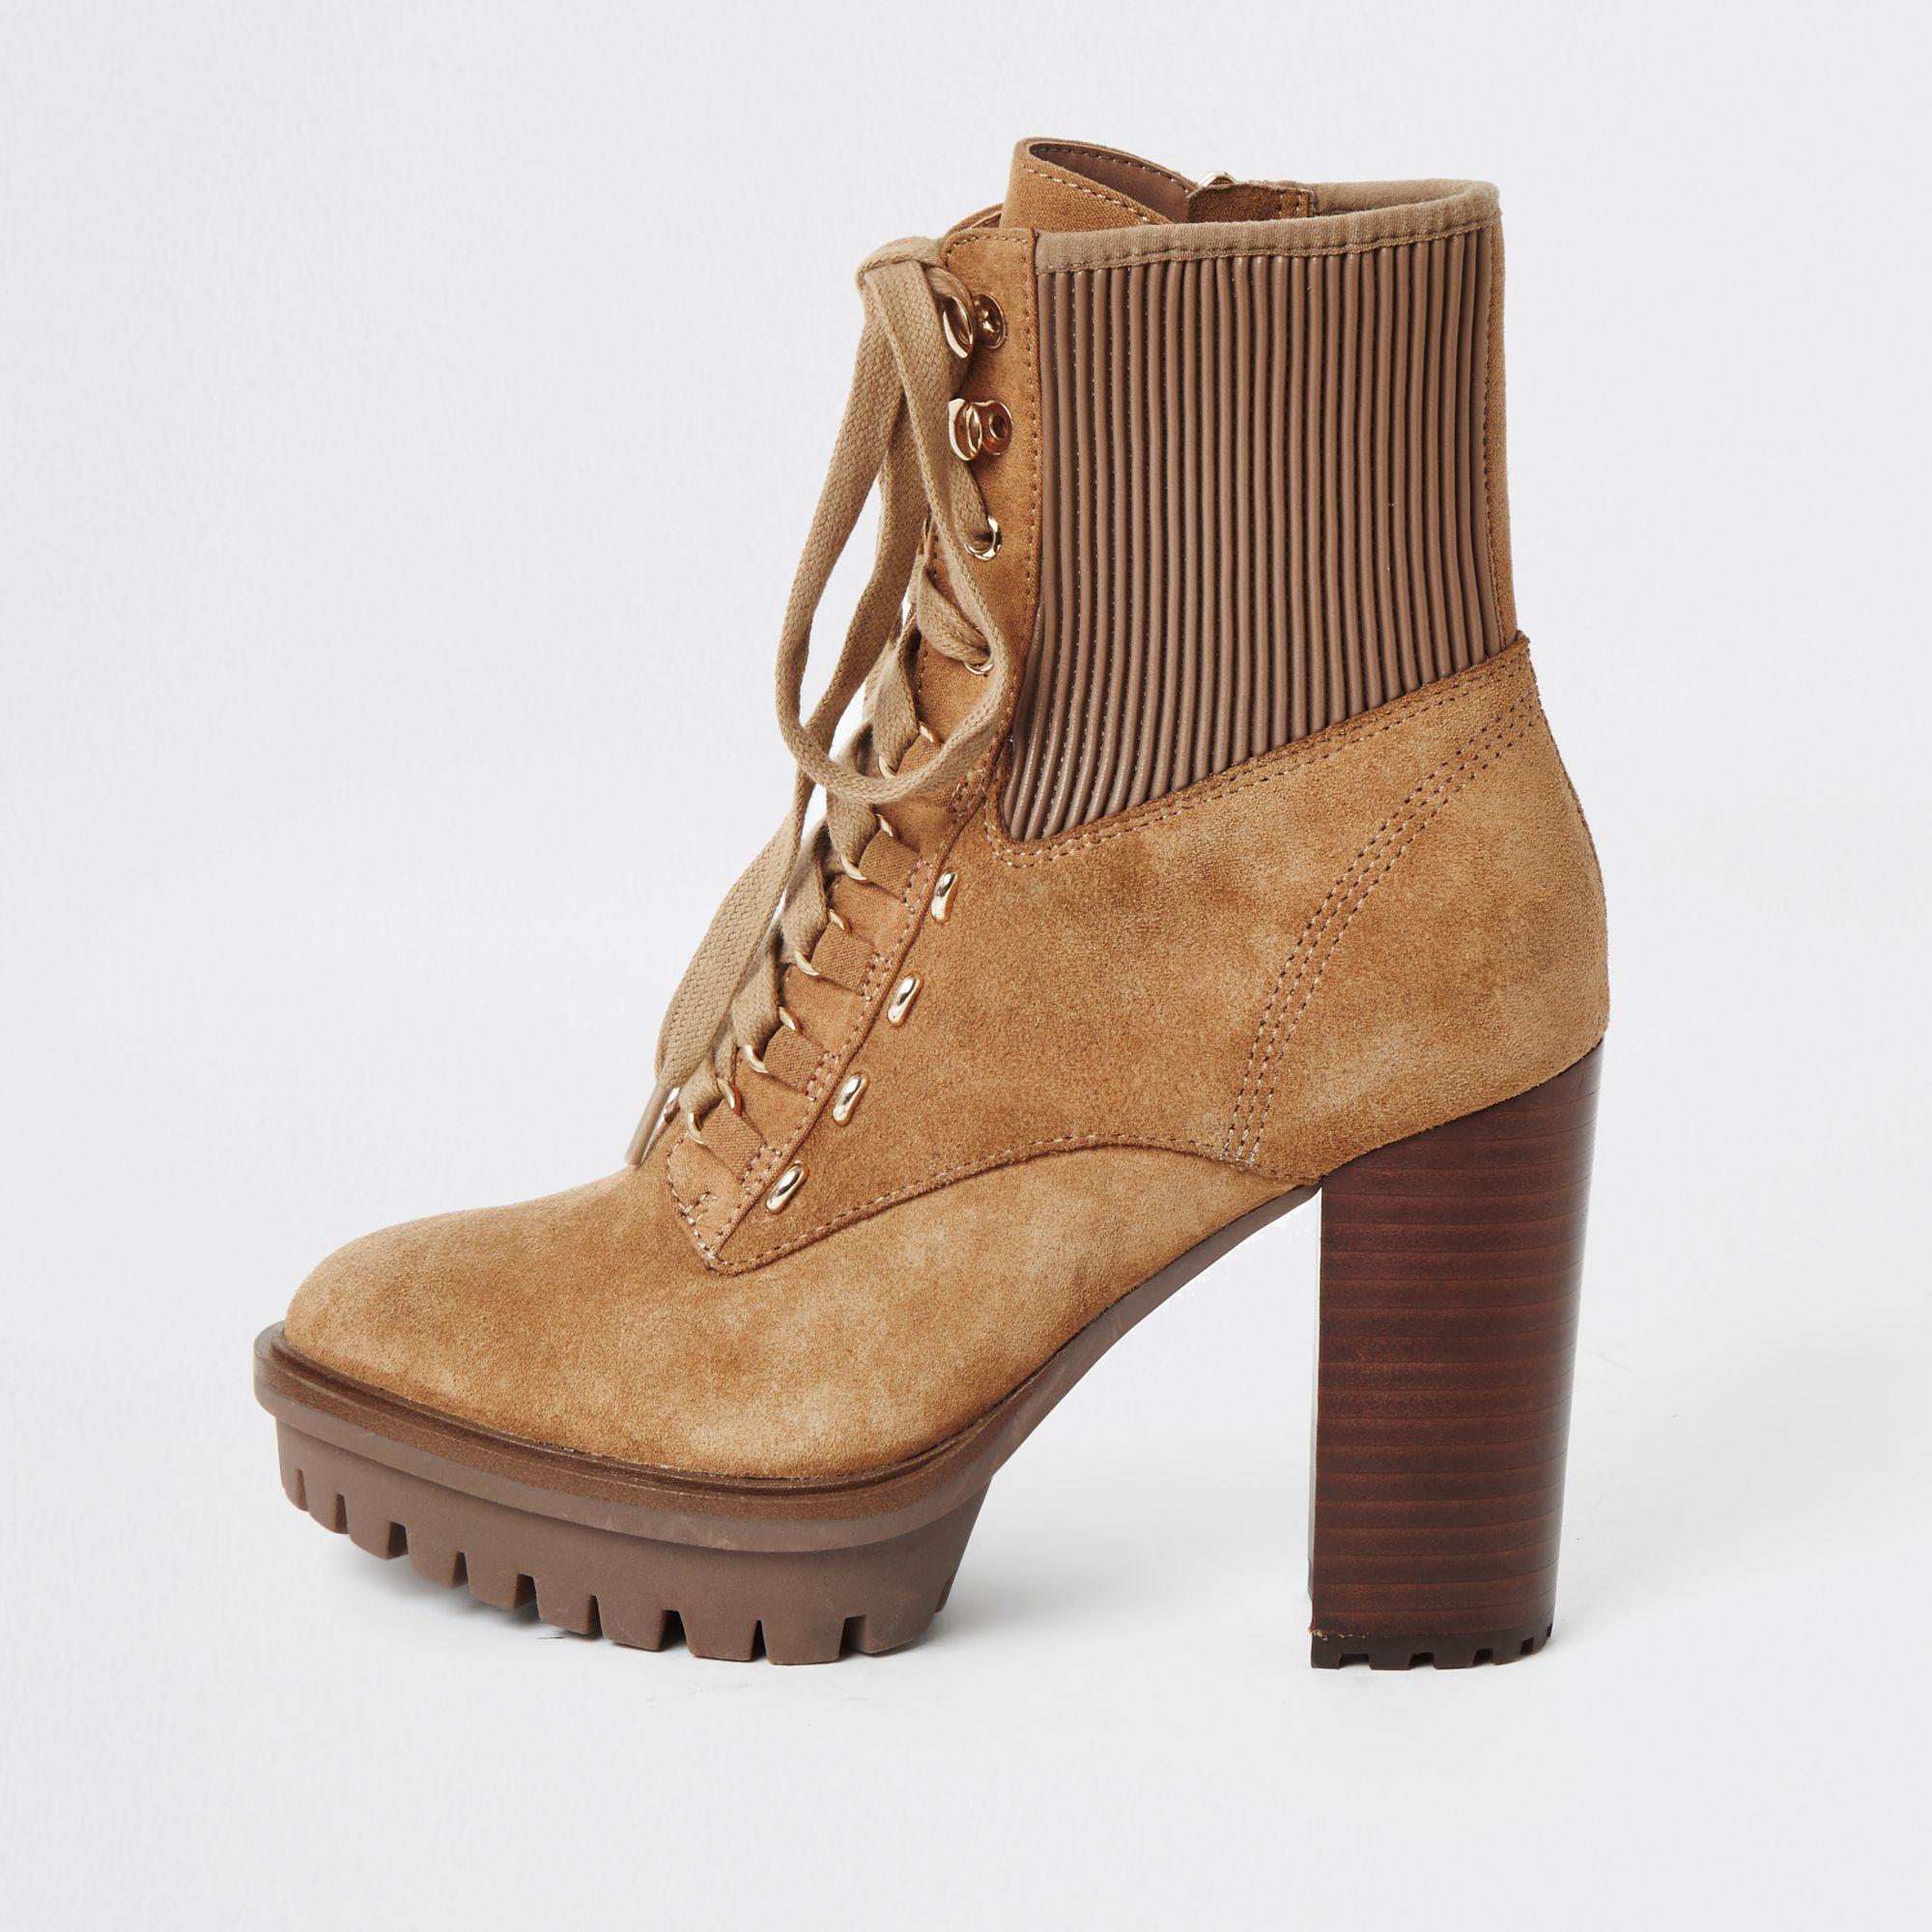 River Island Suede Lace-up High Heeled Hiker Boots in Beige (Natural ...